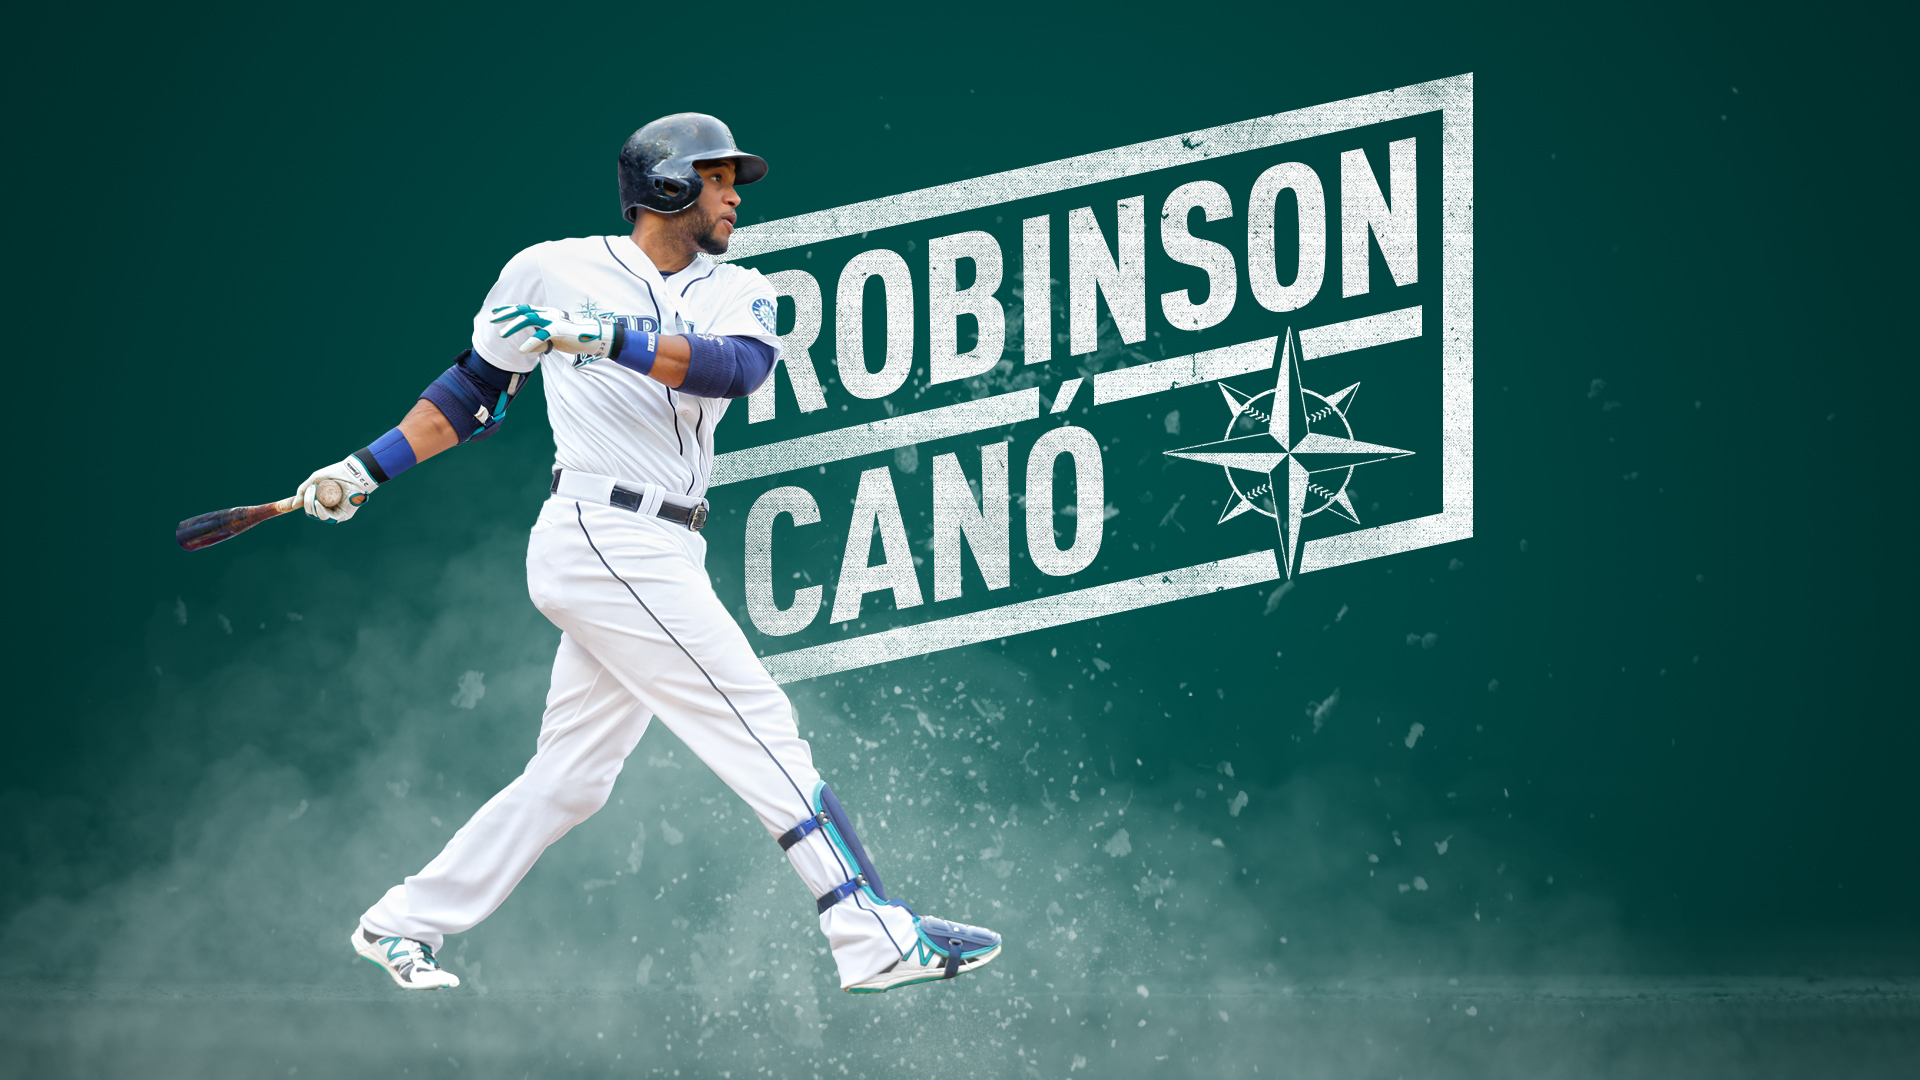 Best Robinson Cano Wallpaper Jackie